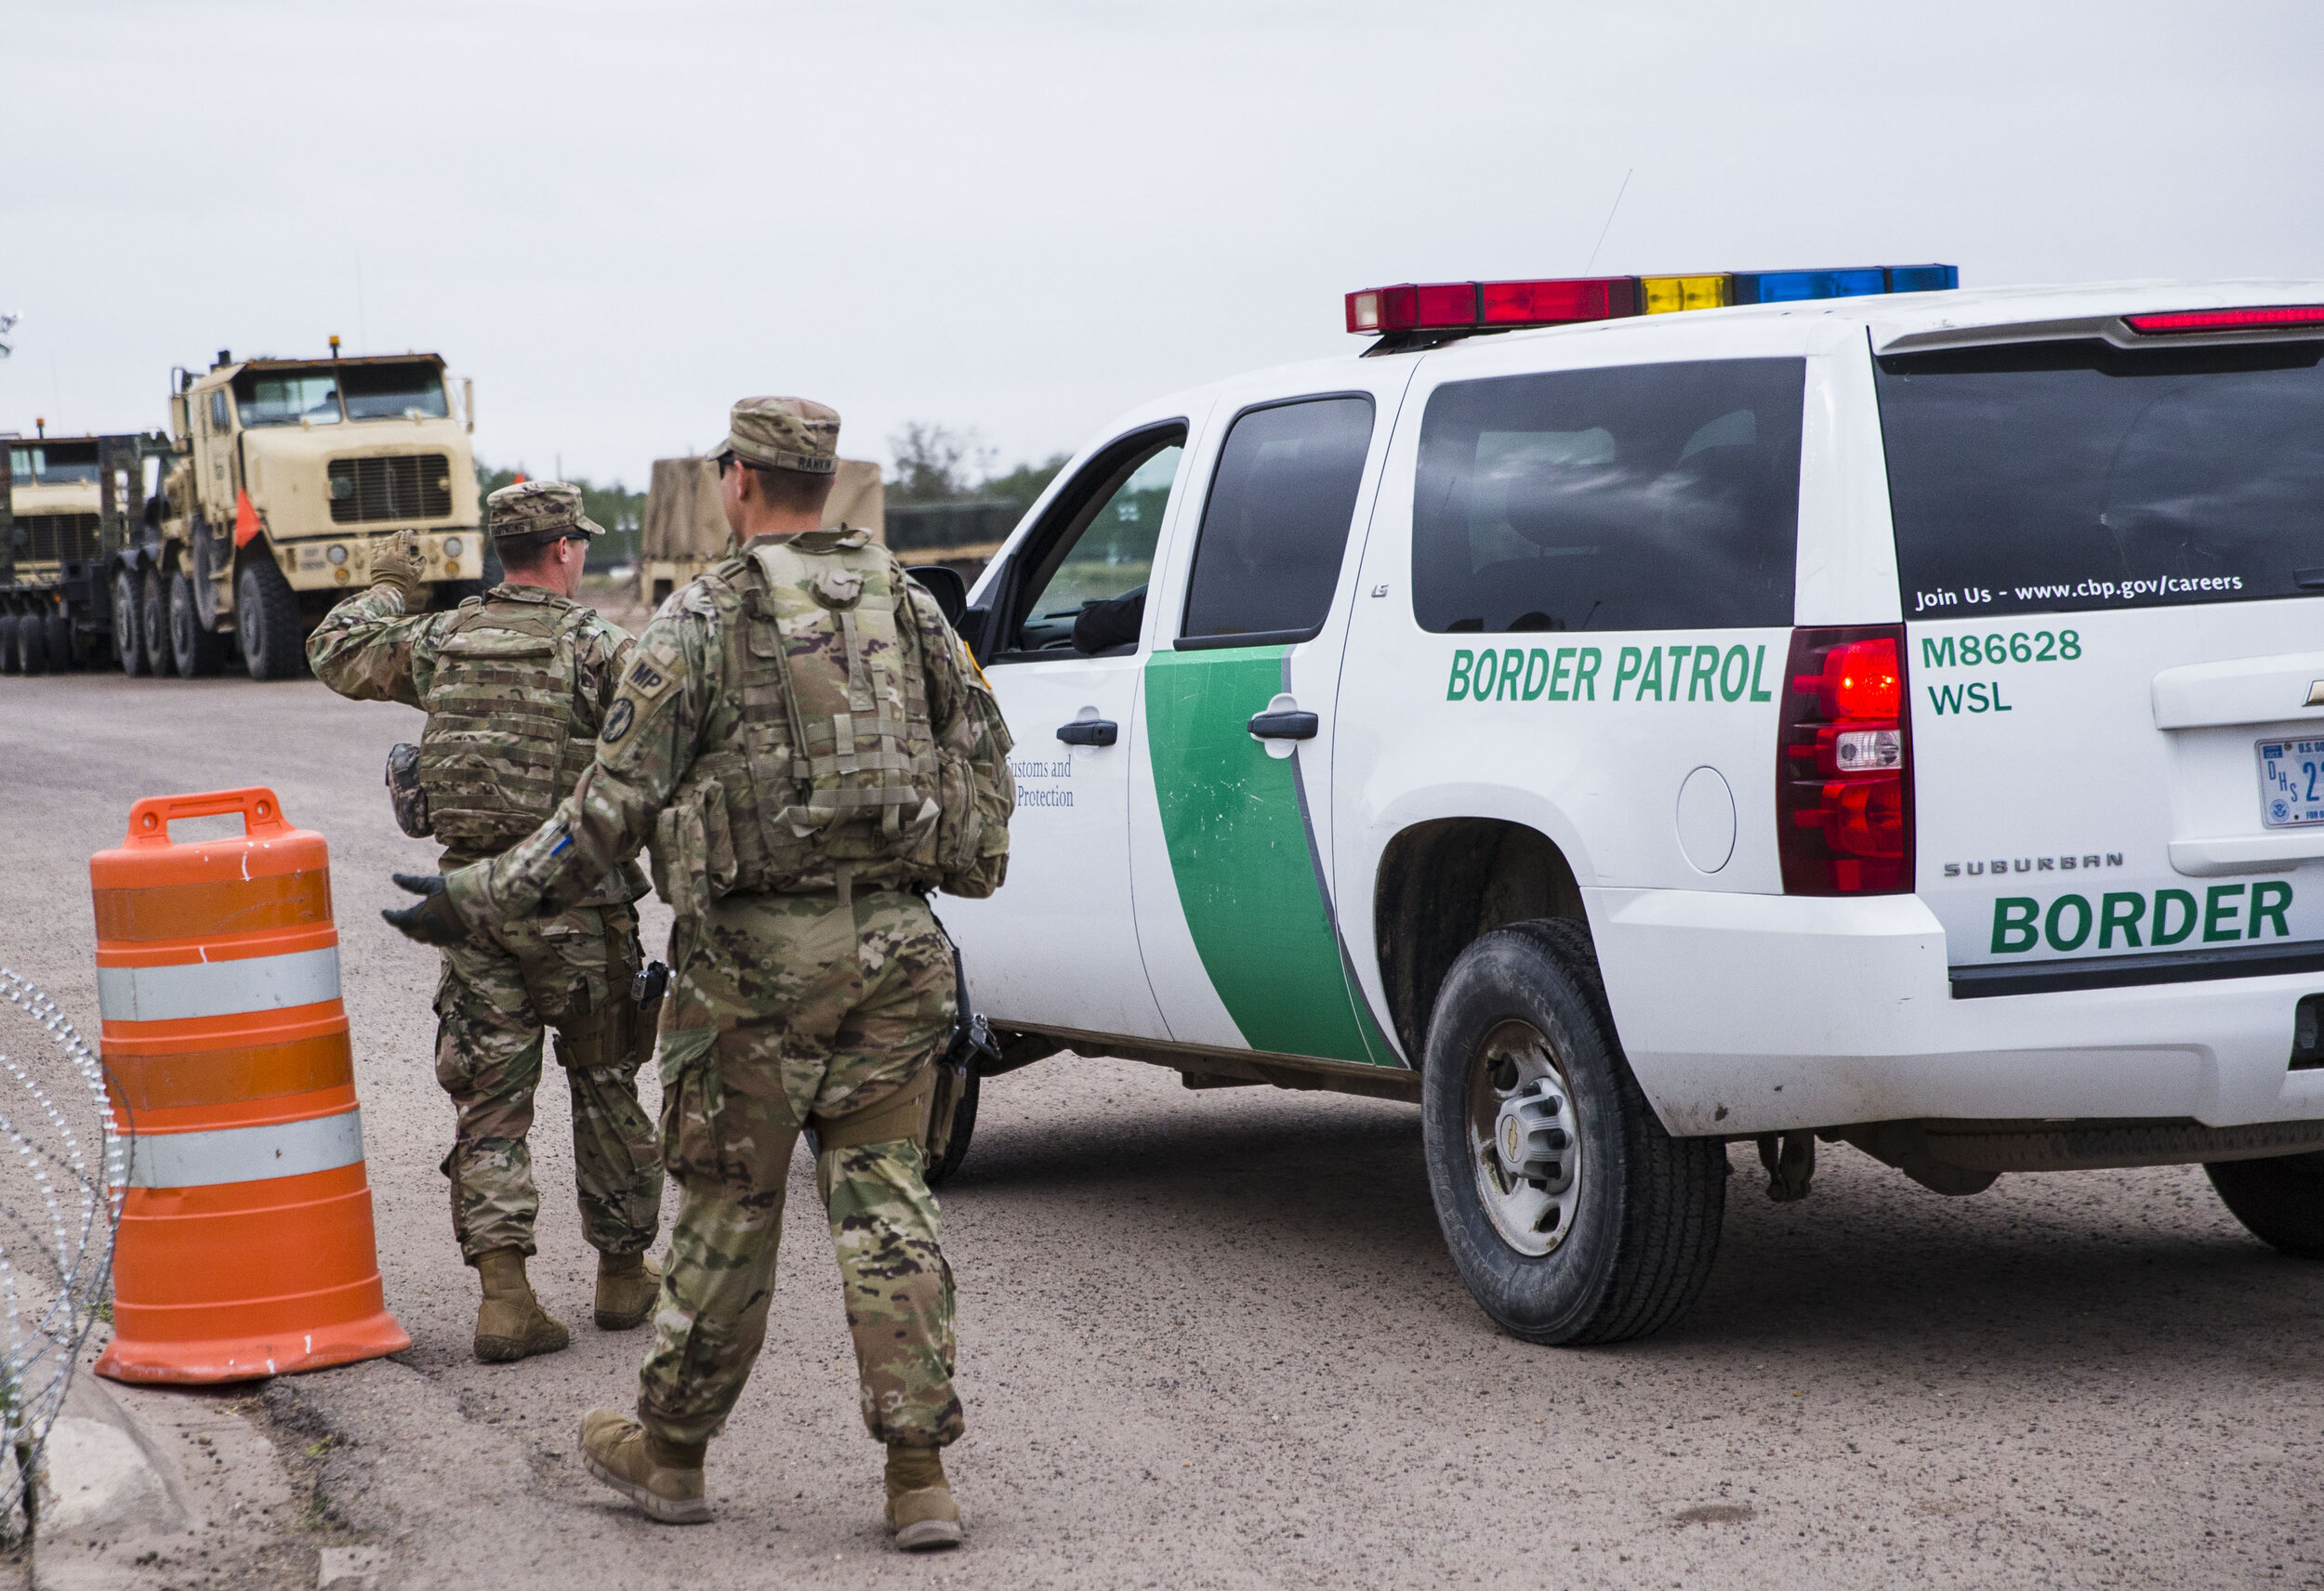  U.S. Army troops deployed to the U.S.-Mexico border in Texas set up a Military camp at the old Craig's Furniture in Weslaco, TX.  Army personal open the gate for Border Patrol Agents on Wednesday, Dec. 5, 2018.  Defense Secretary James Mattis extend